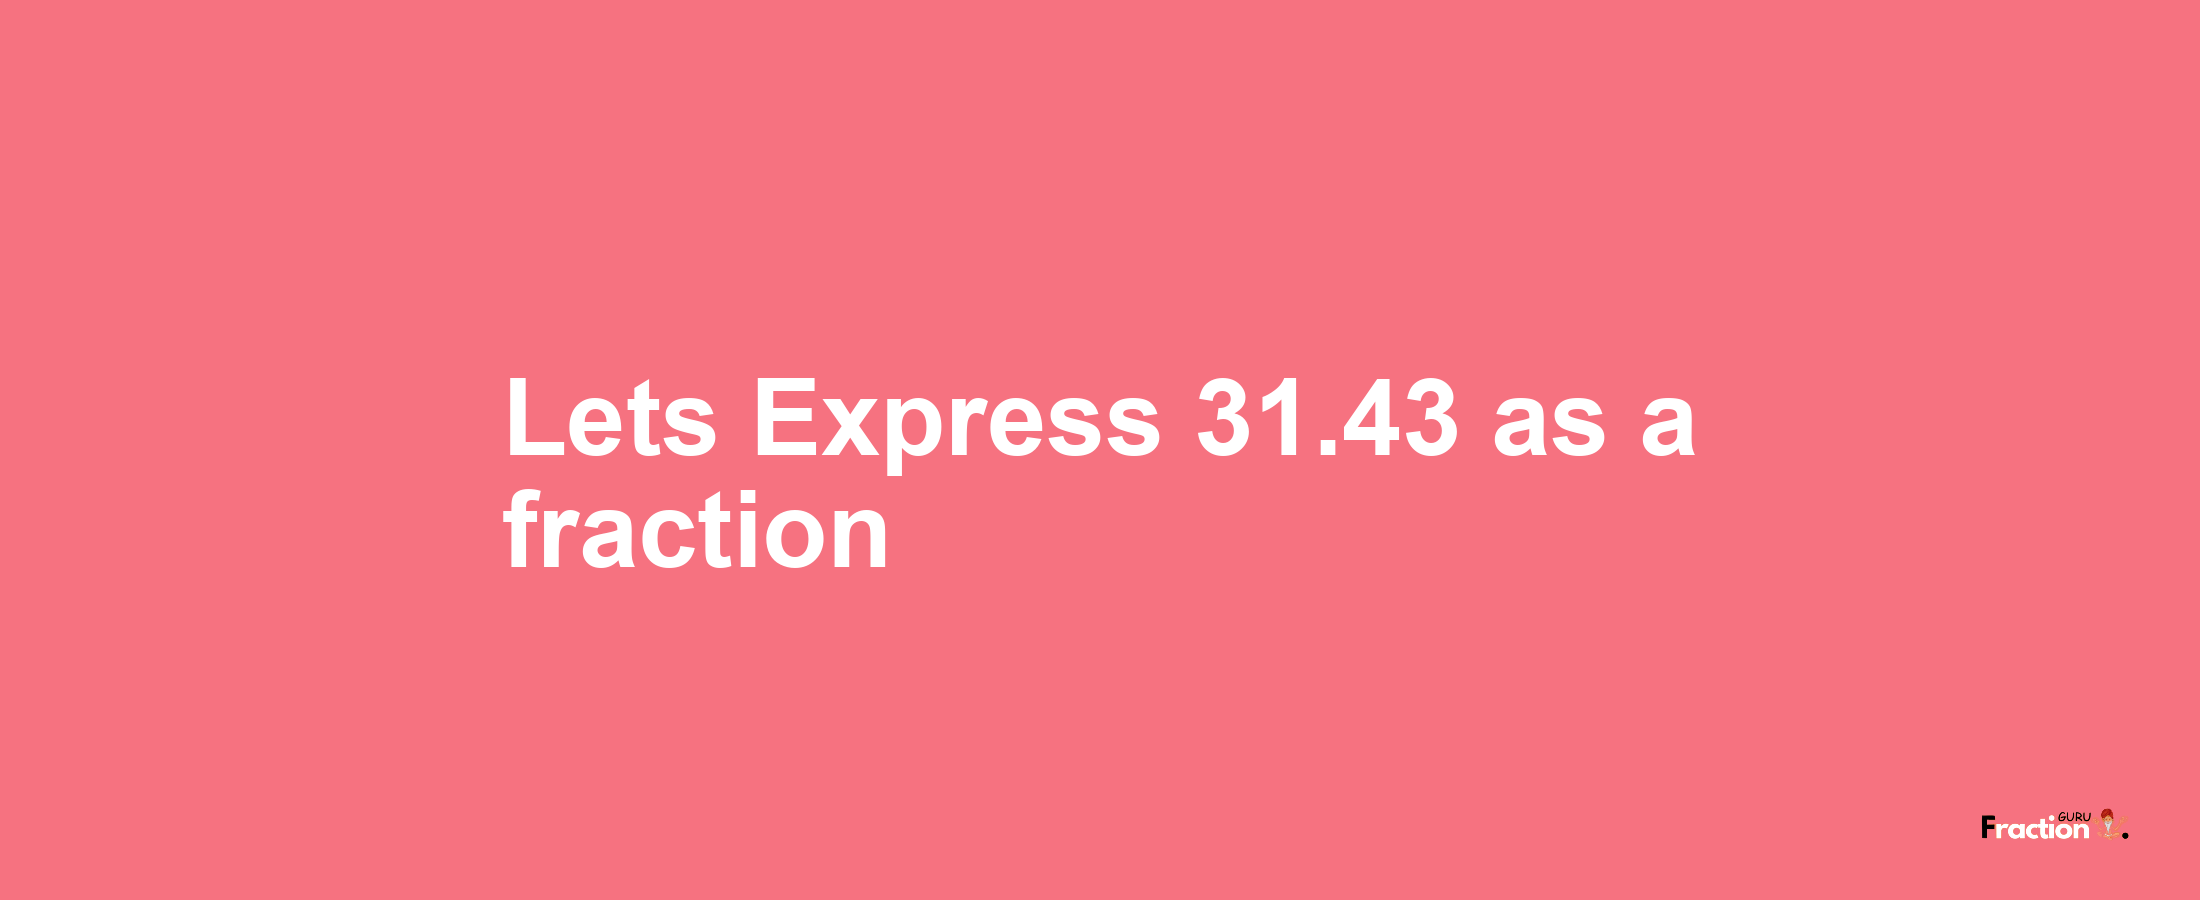 Lets Express 31.43 as afraction